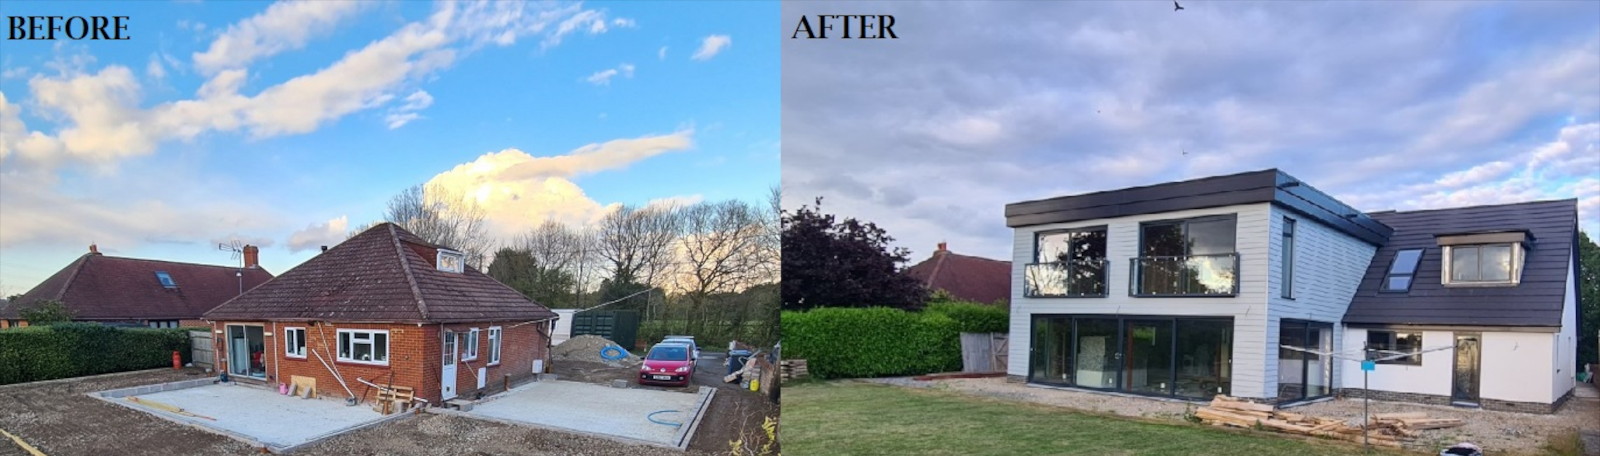 Before and After conversion photographs - Rear Elevation